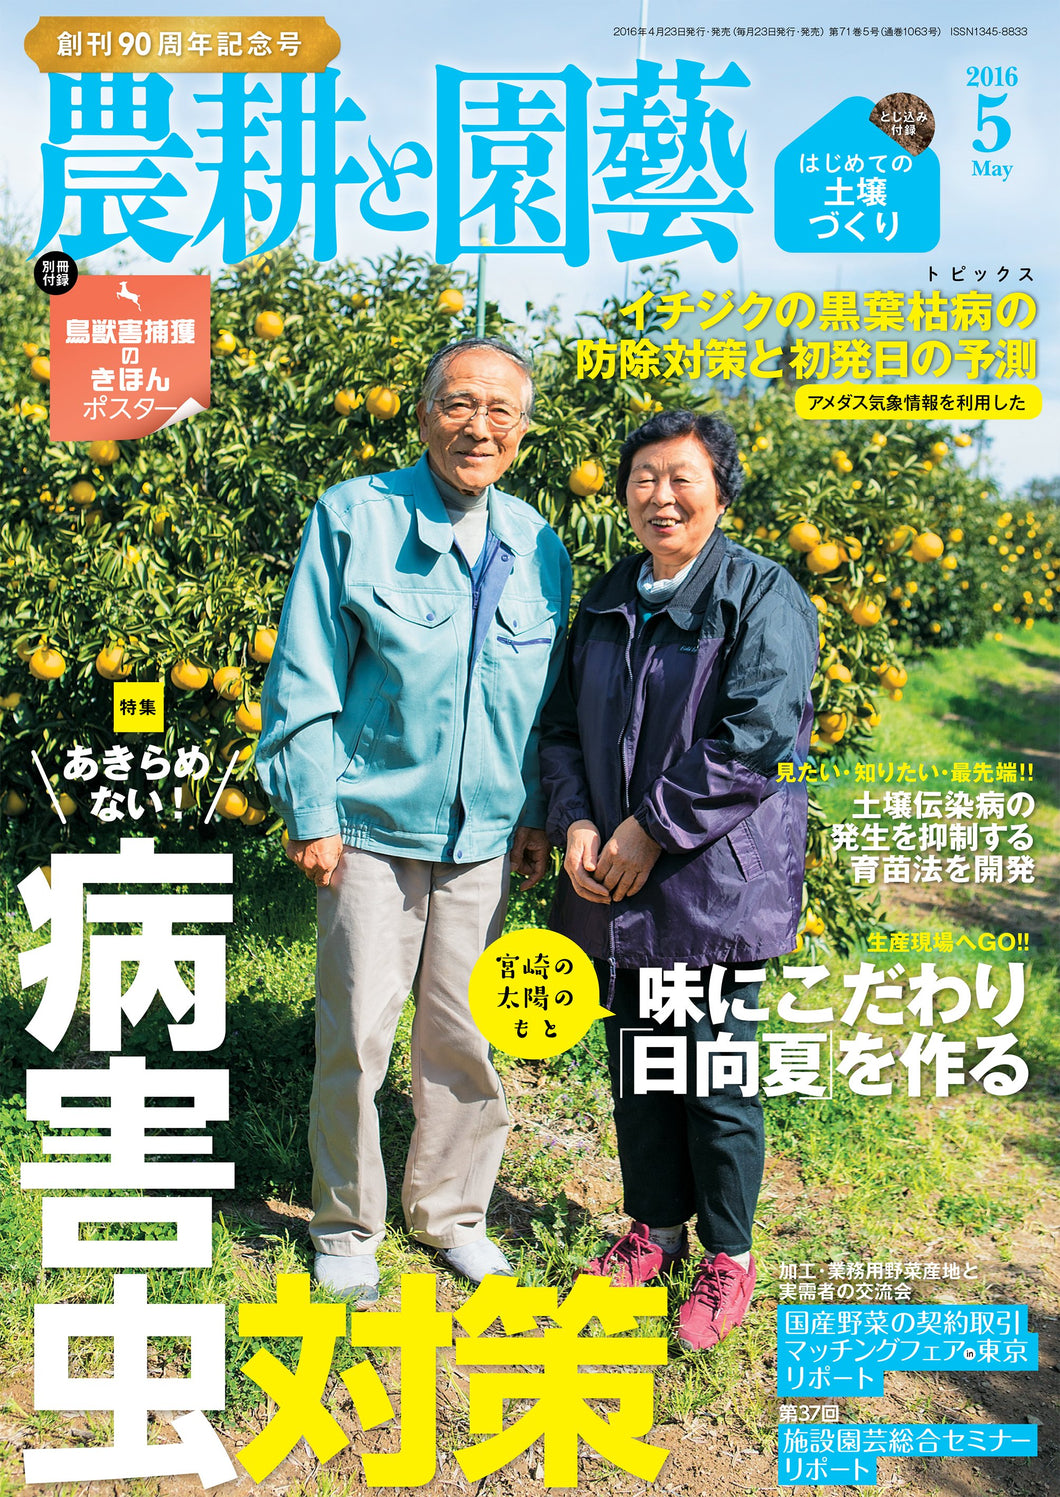 Agriculture and Horticulture May 2016 <Extra-large issue, interleaved appendix>